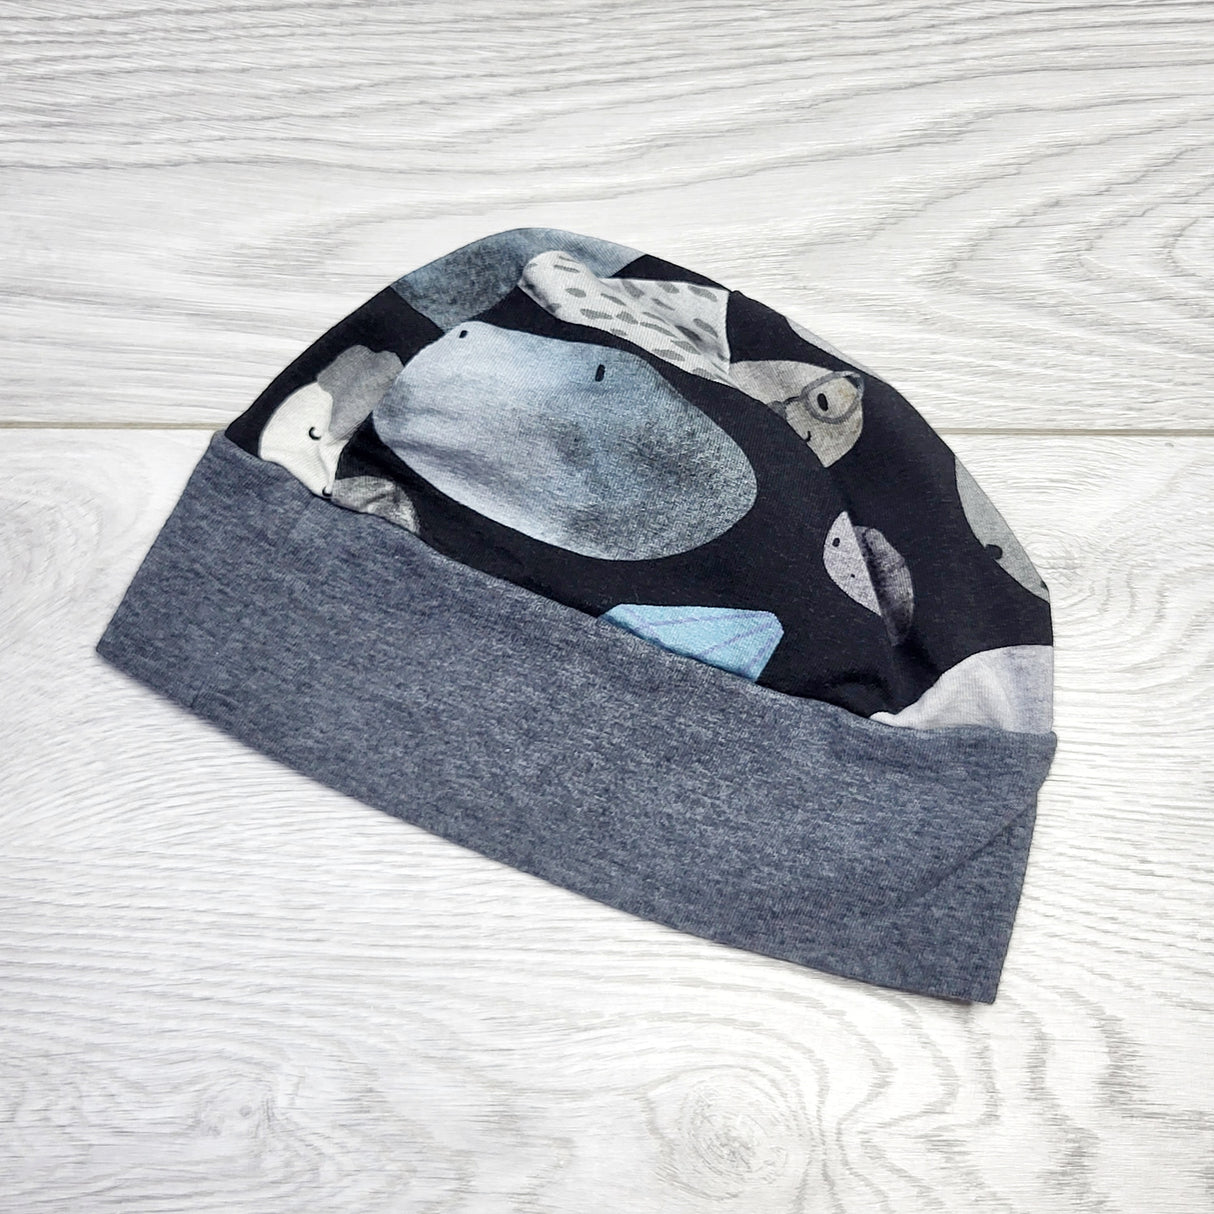 RZA2 - Handmade infant hat with whales. Size 6 months